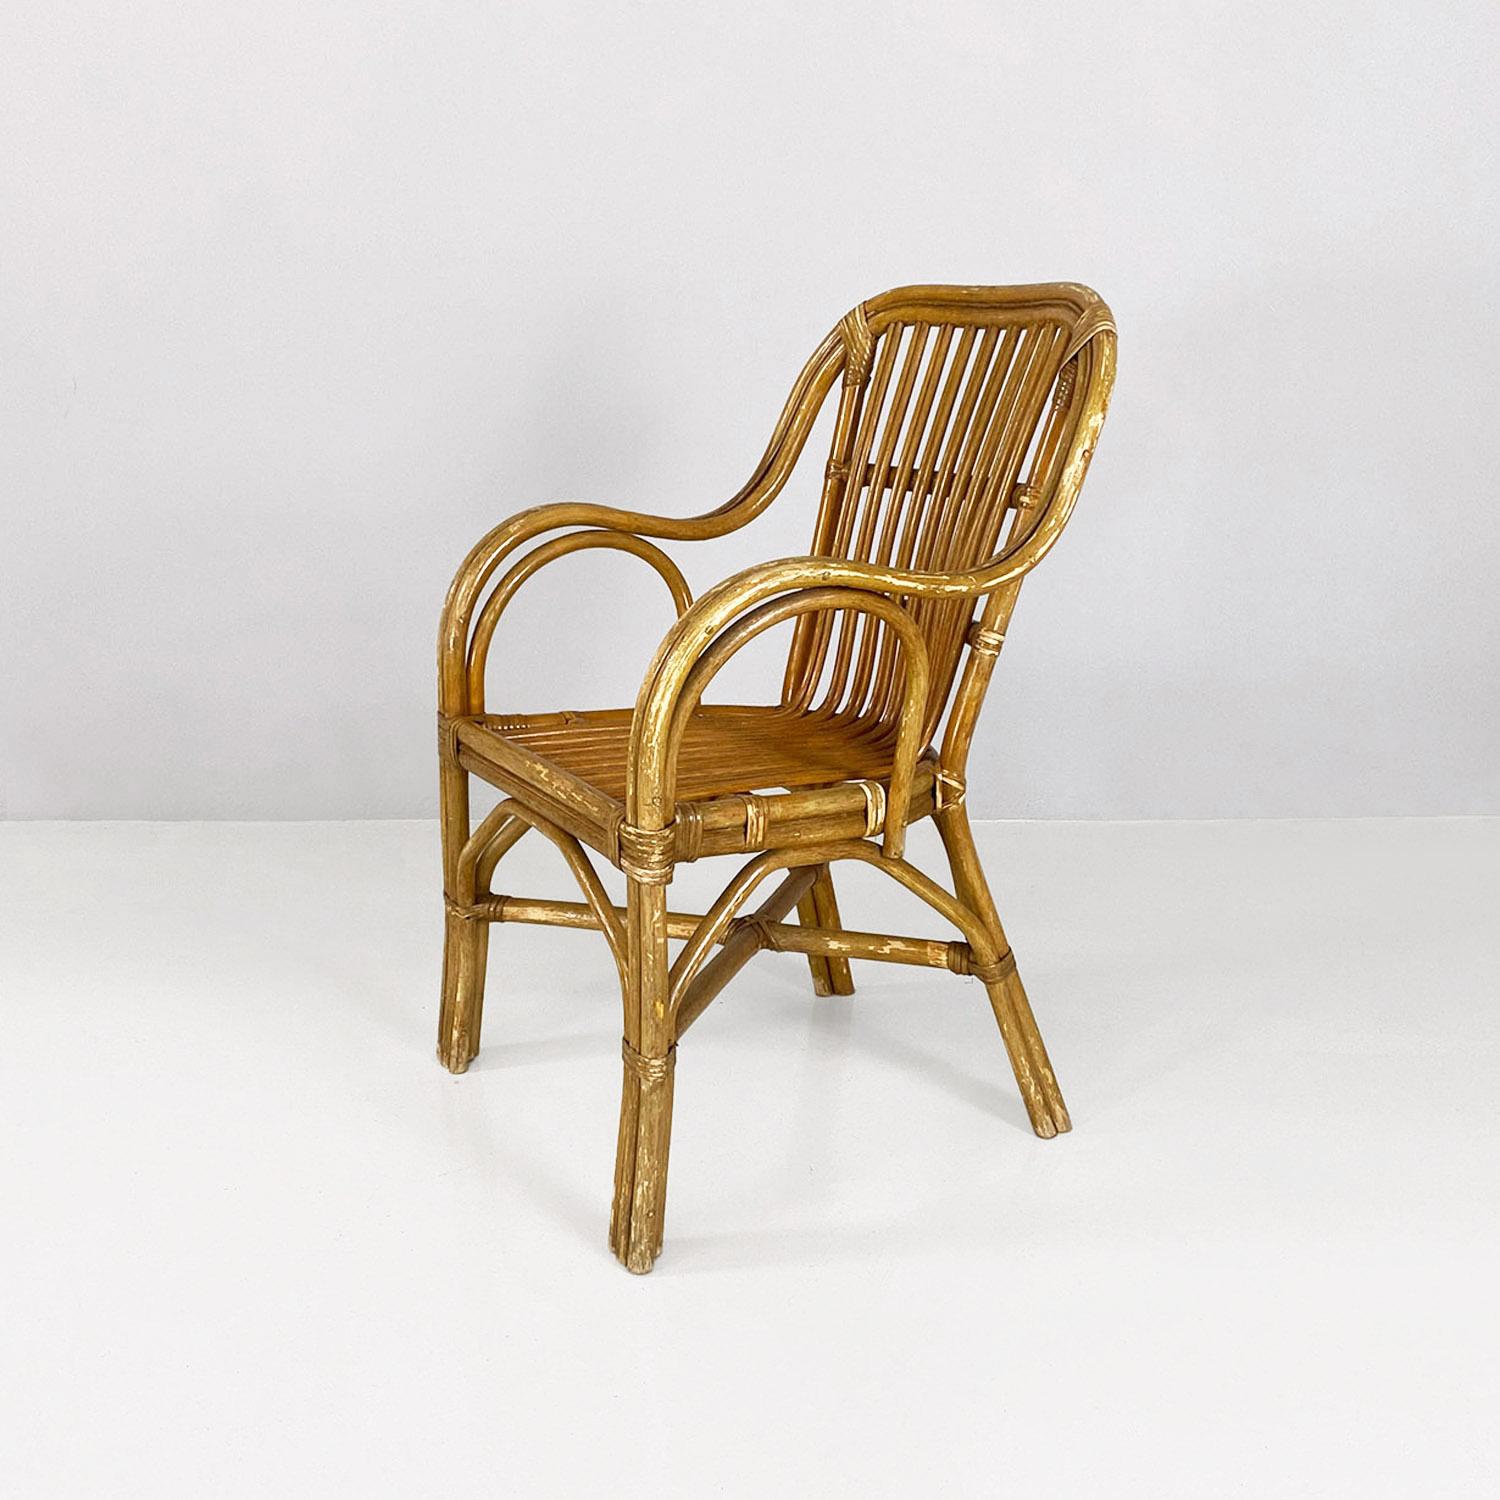 Italian mid-century modern rattan armchairs with curved armrests, 1960s For Sale 2